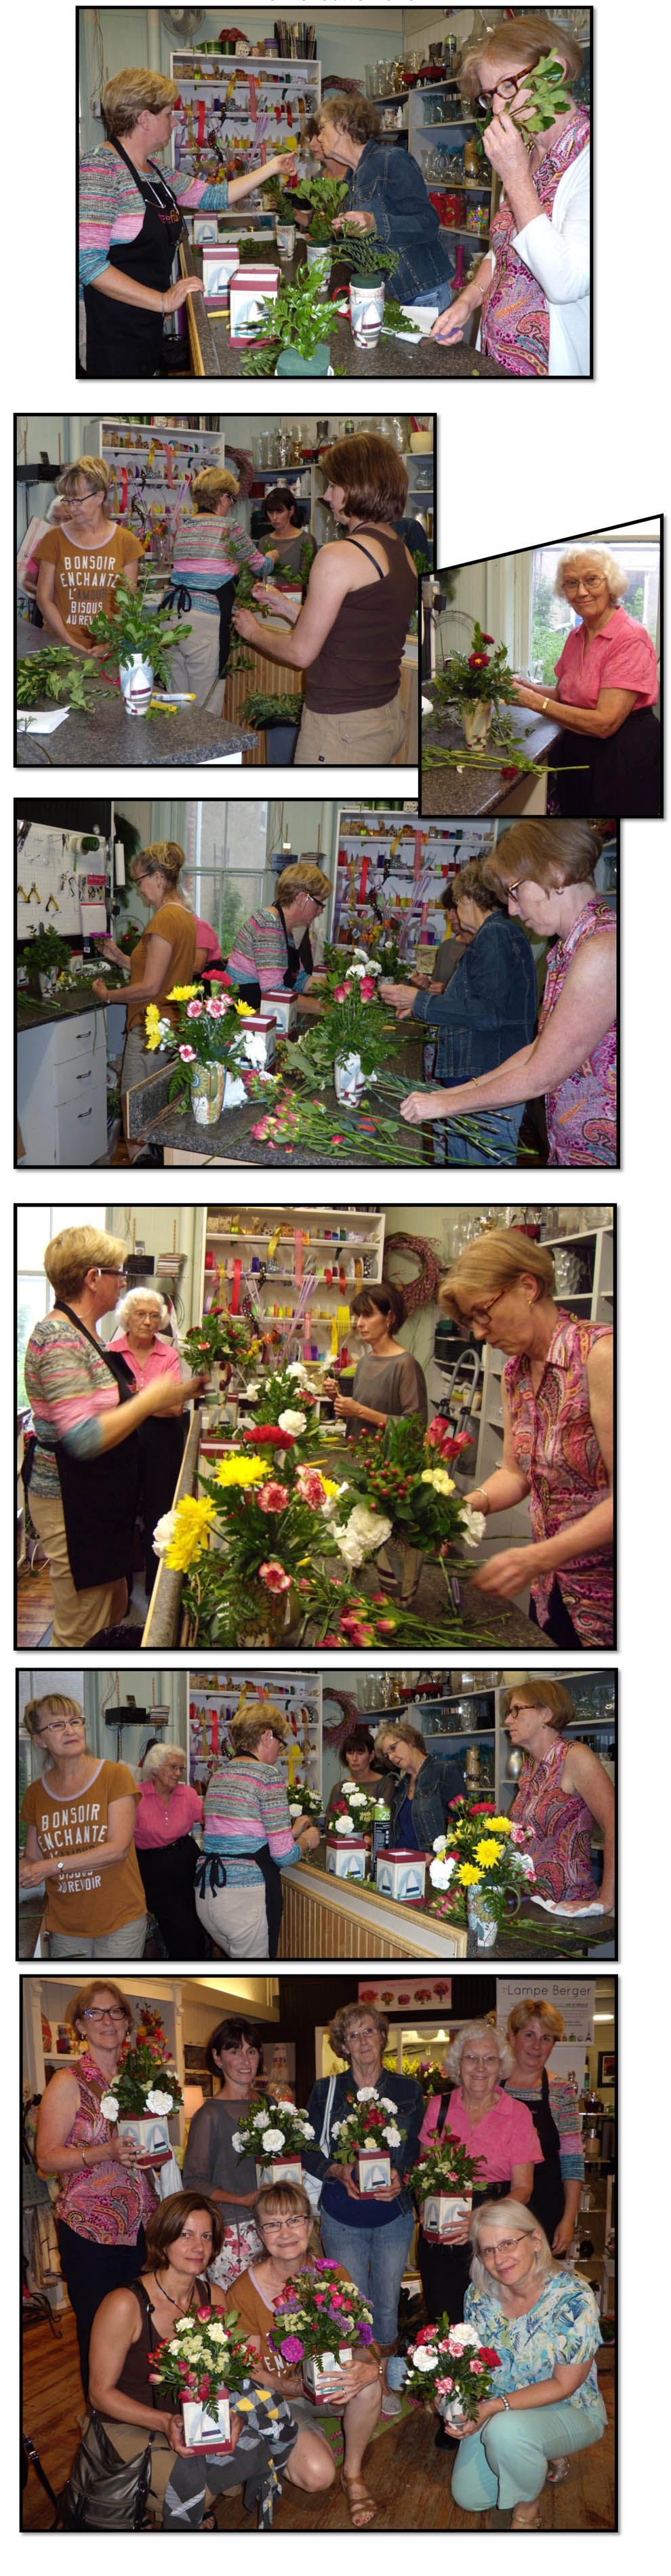 Uxbridge Horticultural Society Workshop at Keith's Flowers June 1515, 2015